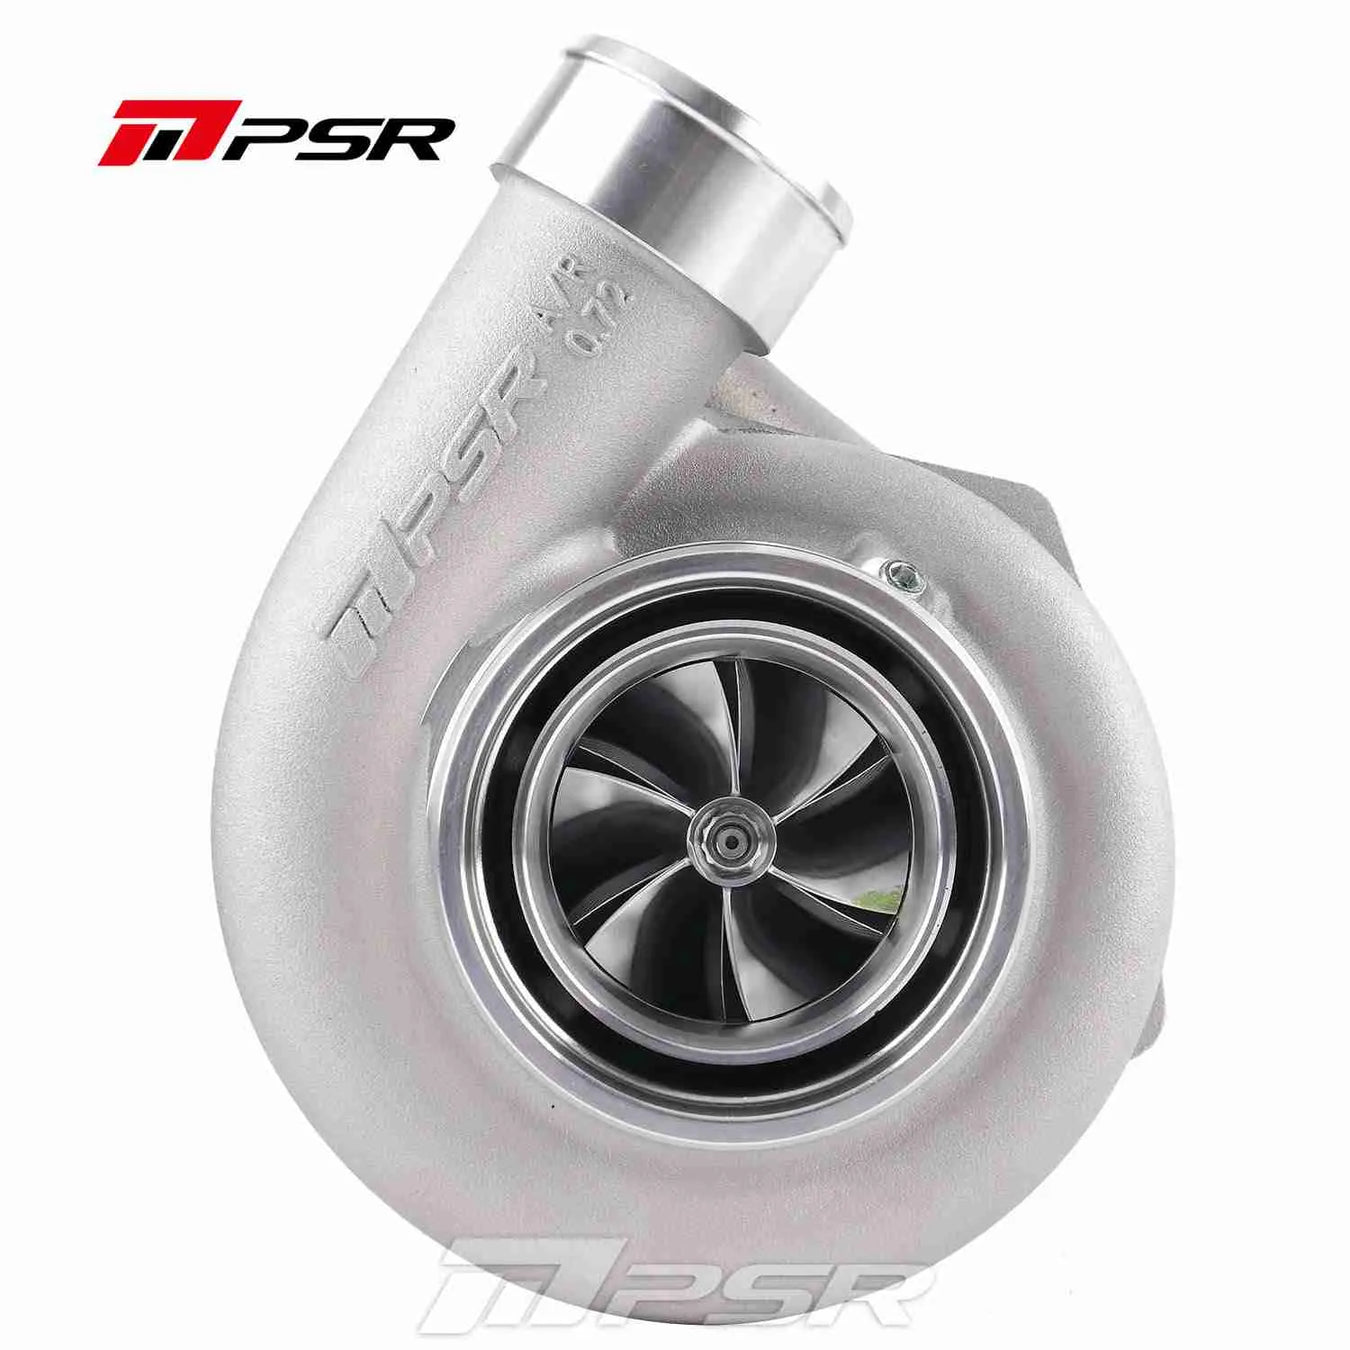 Pulsar PTE Series (Precision Turbo Replacement)